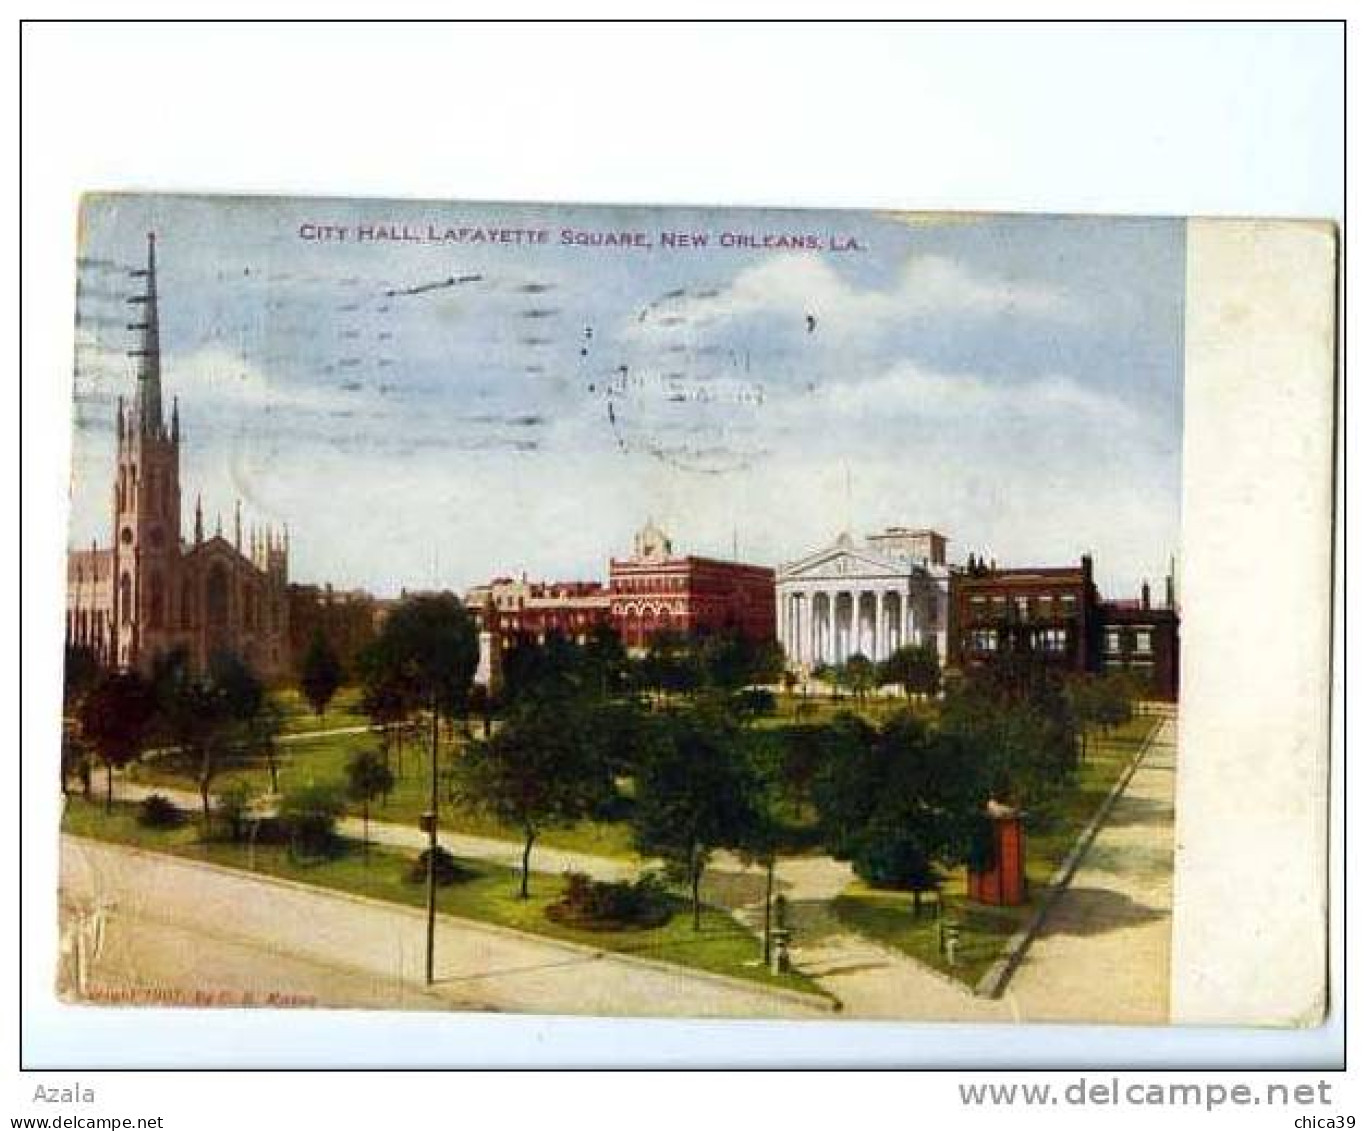 007487  -  City Hall, Lafayette Square, New Orleans - New Orleans